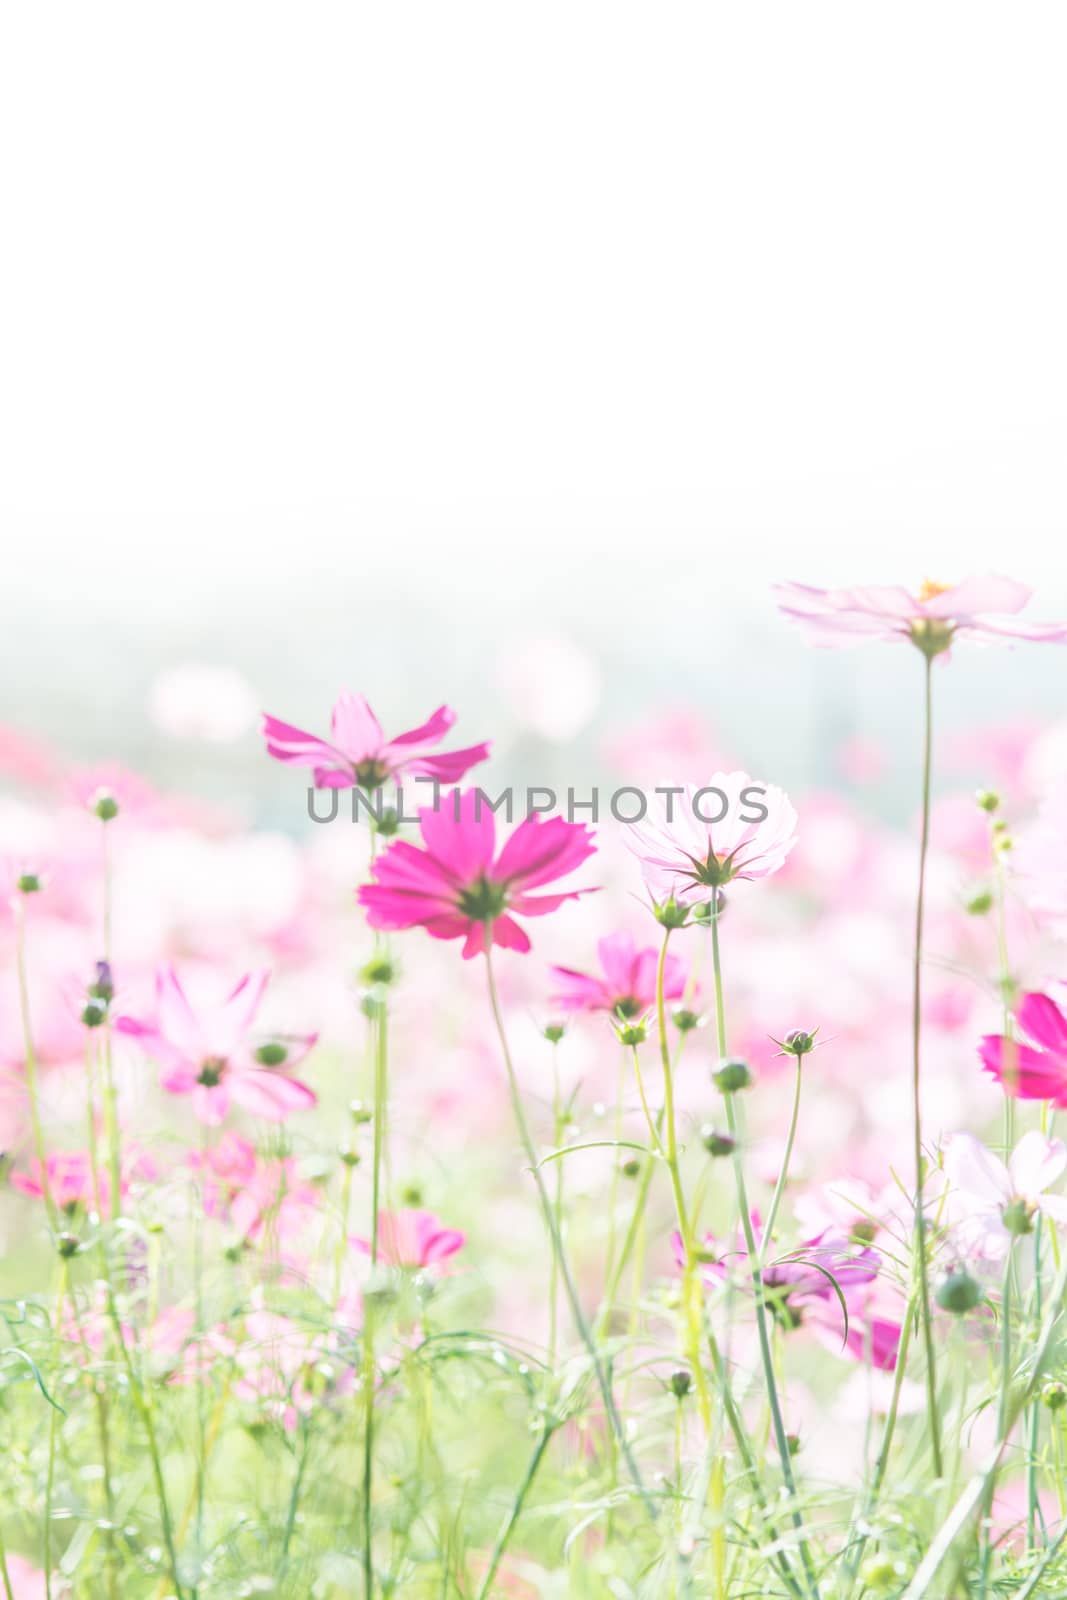 Cosmos flowers in nature, sweet background, blurry flower background, light pink and deep pink cosmos
